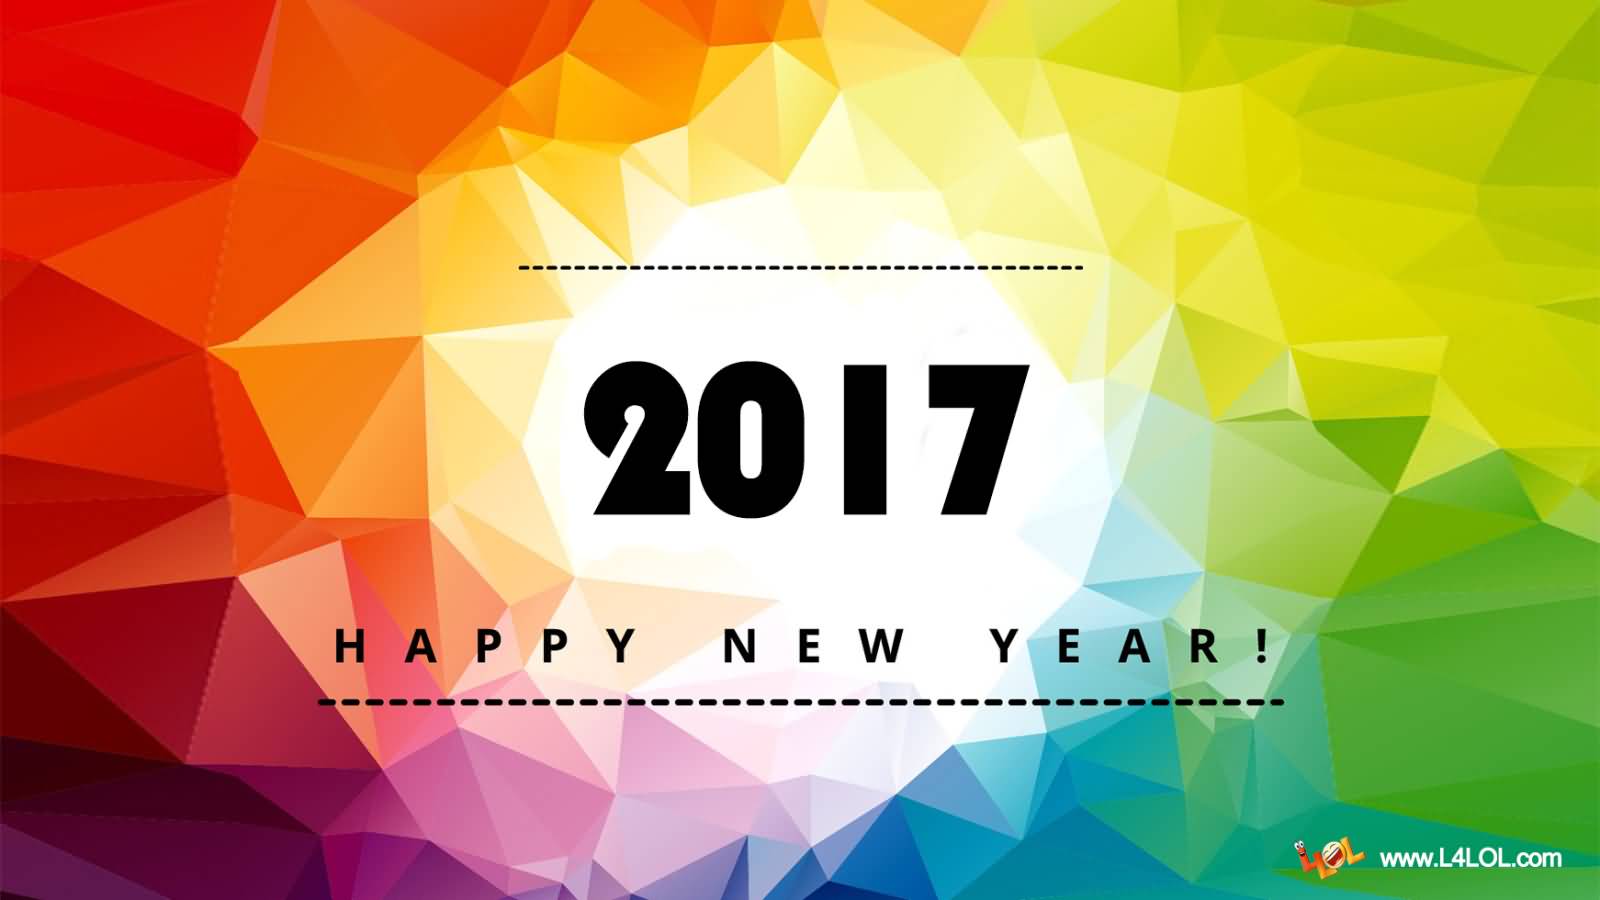 Most Beautiful New Year Greeting Pictures